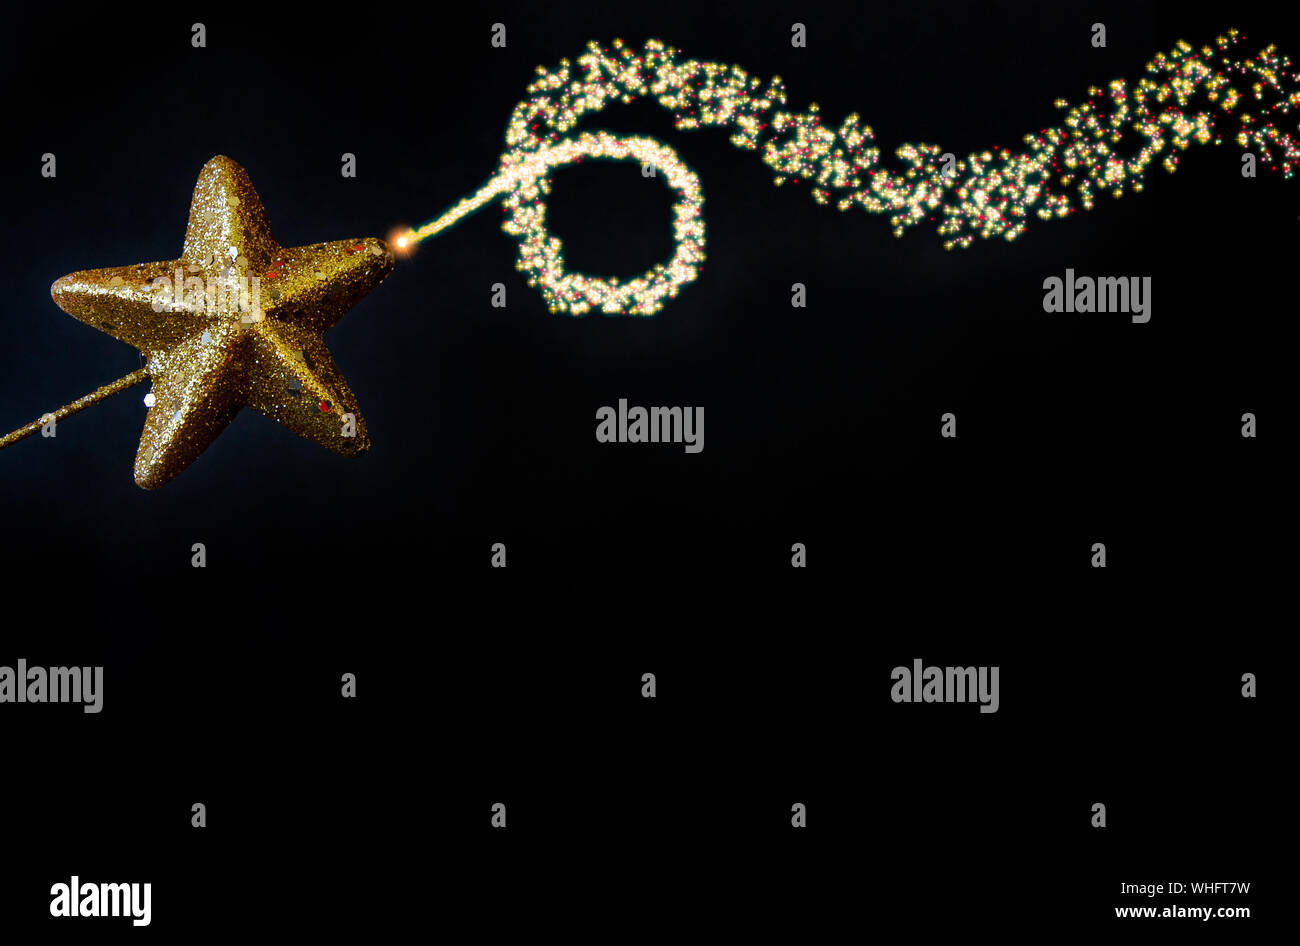 Golden star magiс wand isolated on black background Stock Photo